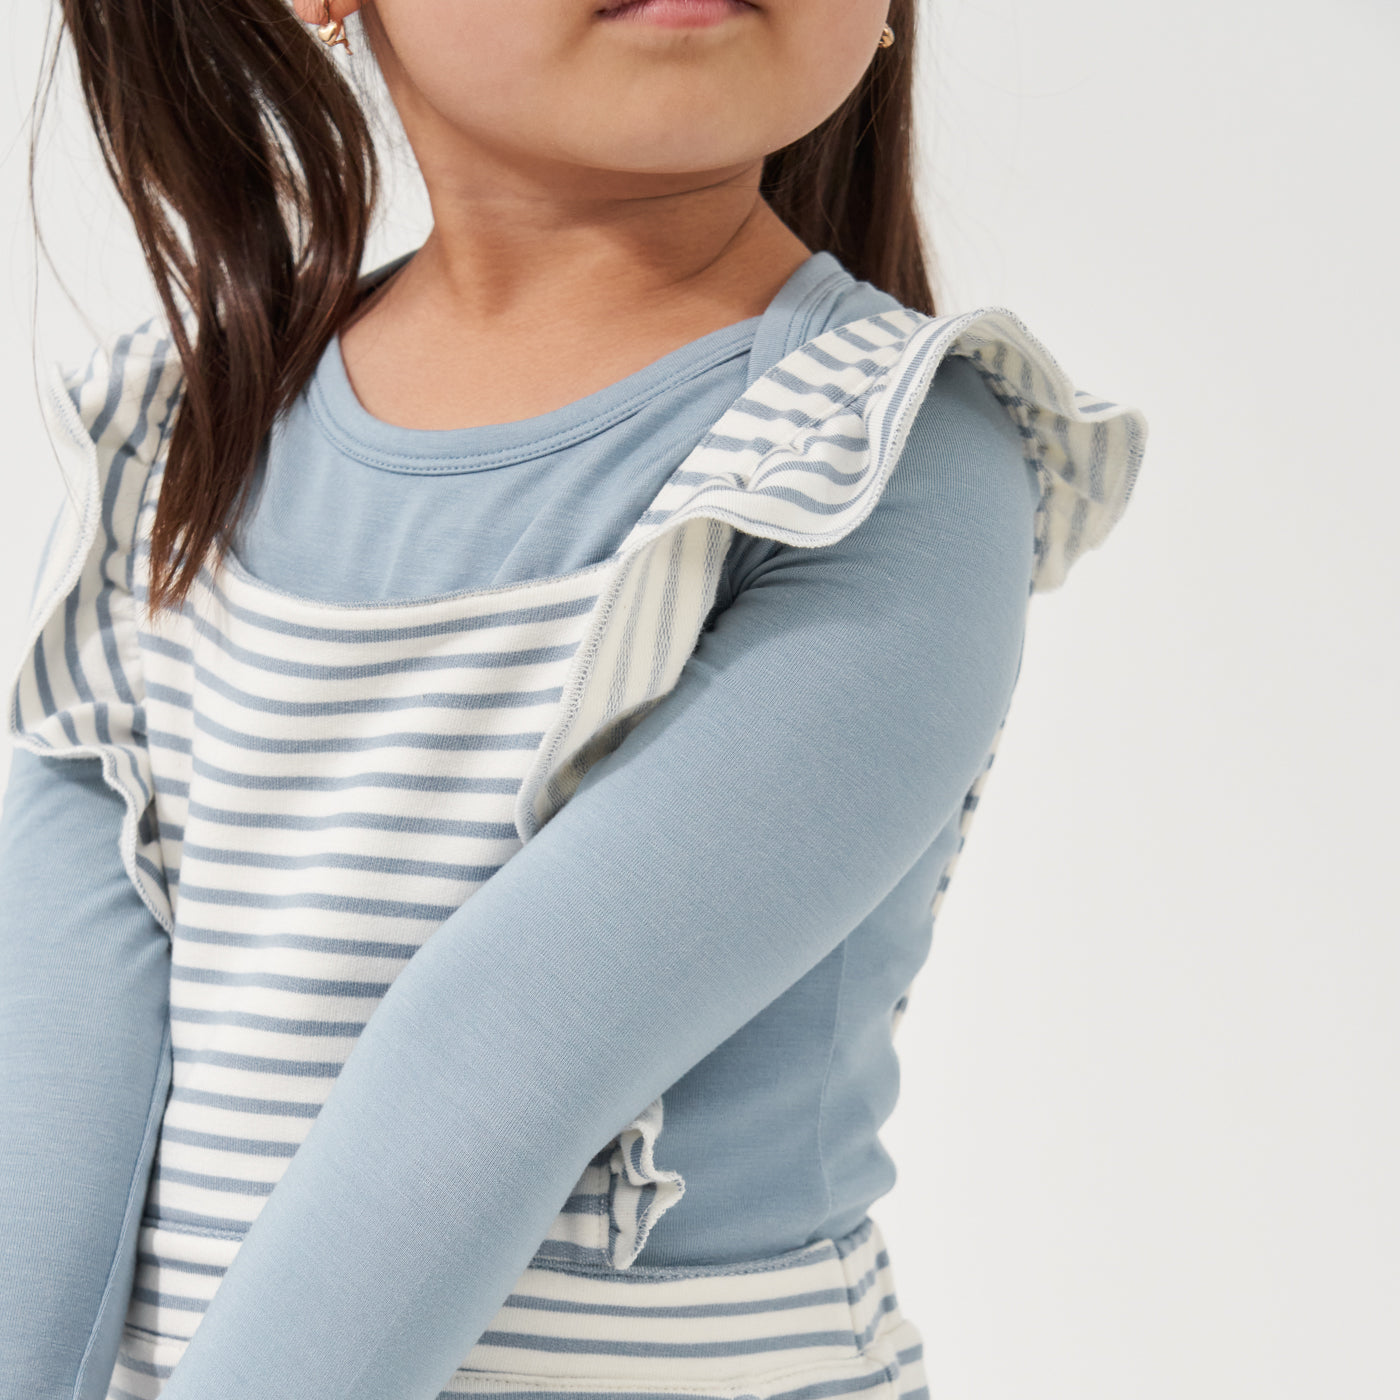 Alternate close up image of a child posing wearing Ivory and Fog Striped ruffle overalls paired with a Fog classic tee detailing the ruffled straps 